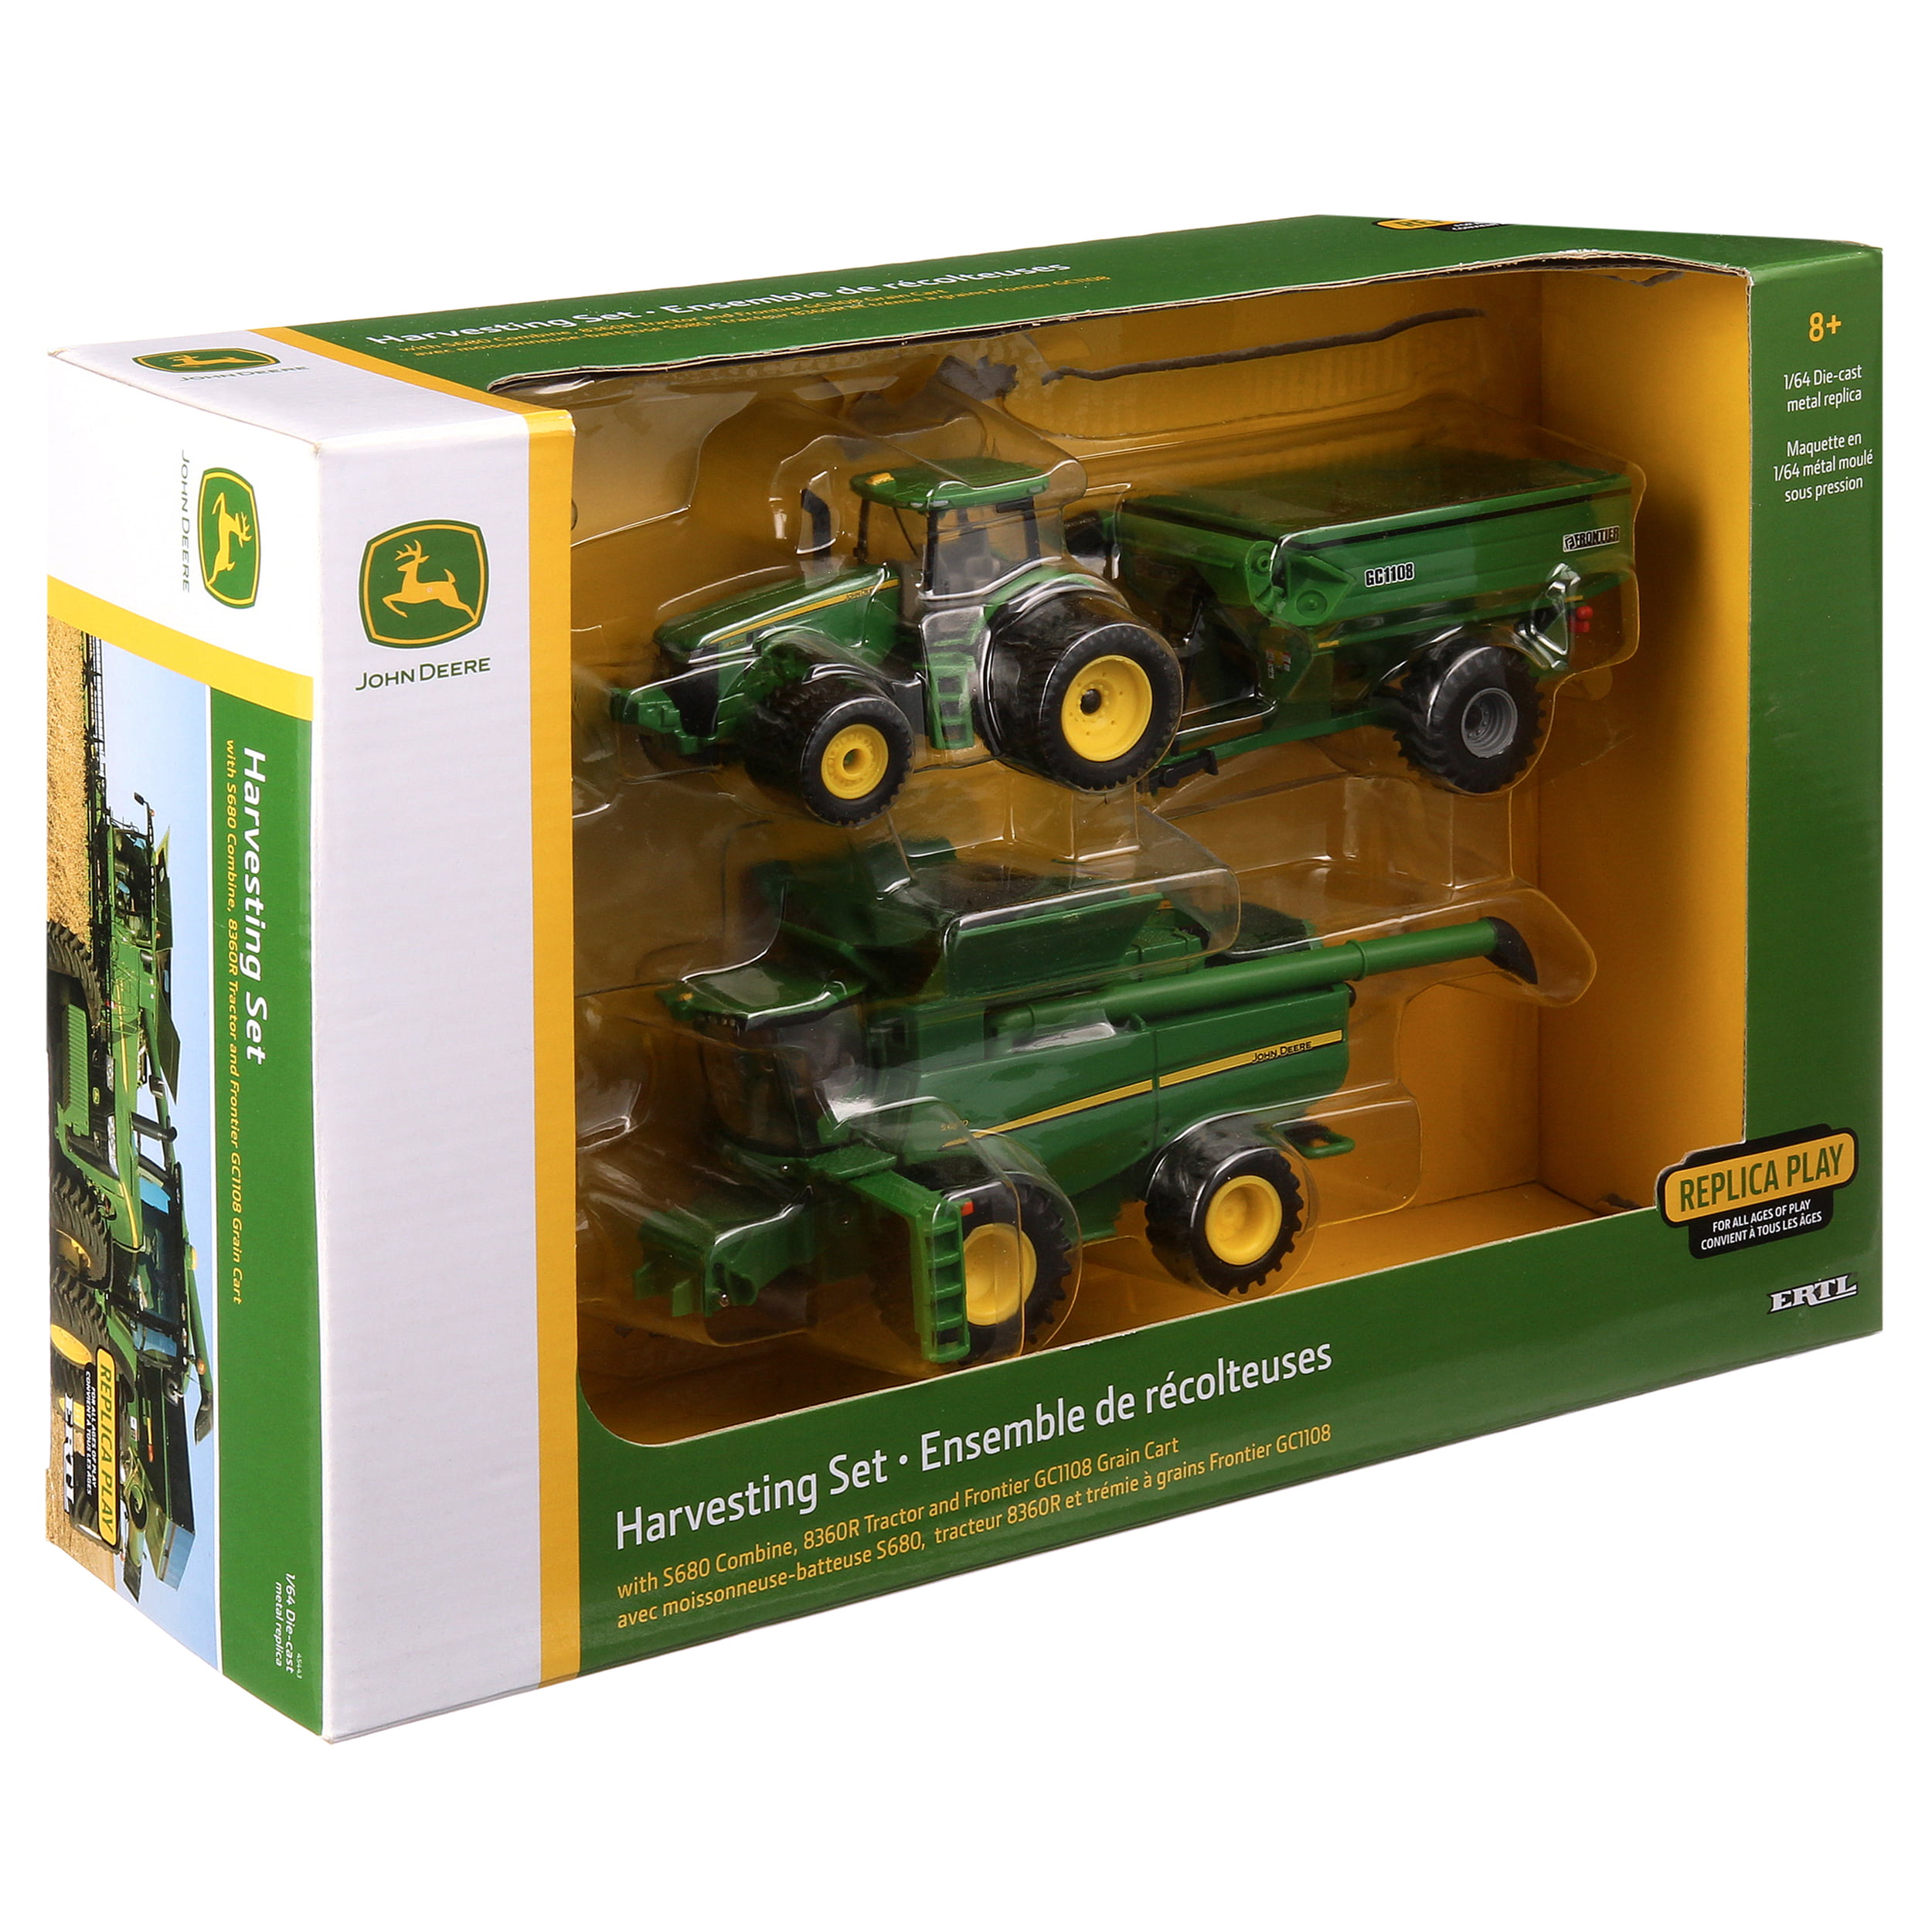 Farm Toy Agriculture Layout Rual 1/64 Scale John Deere Tractor & Trailer Set 